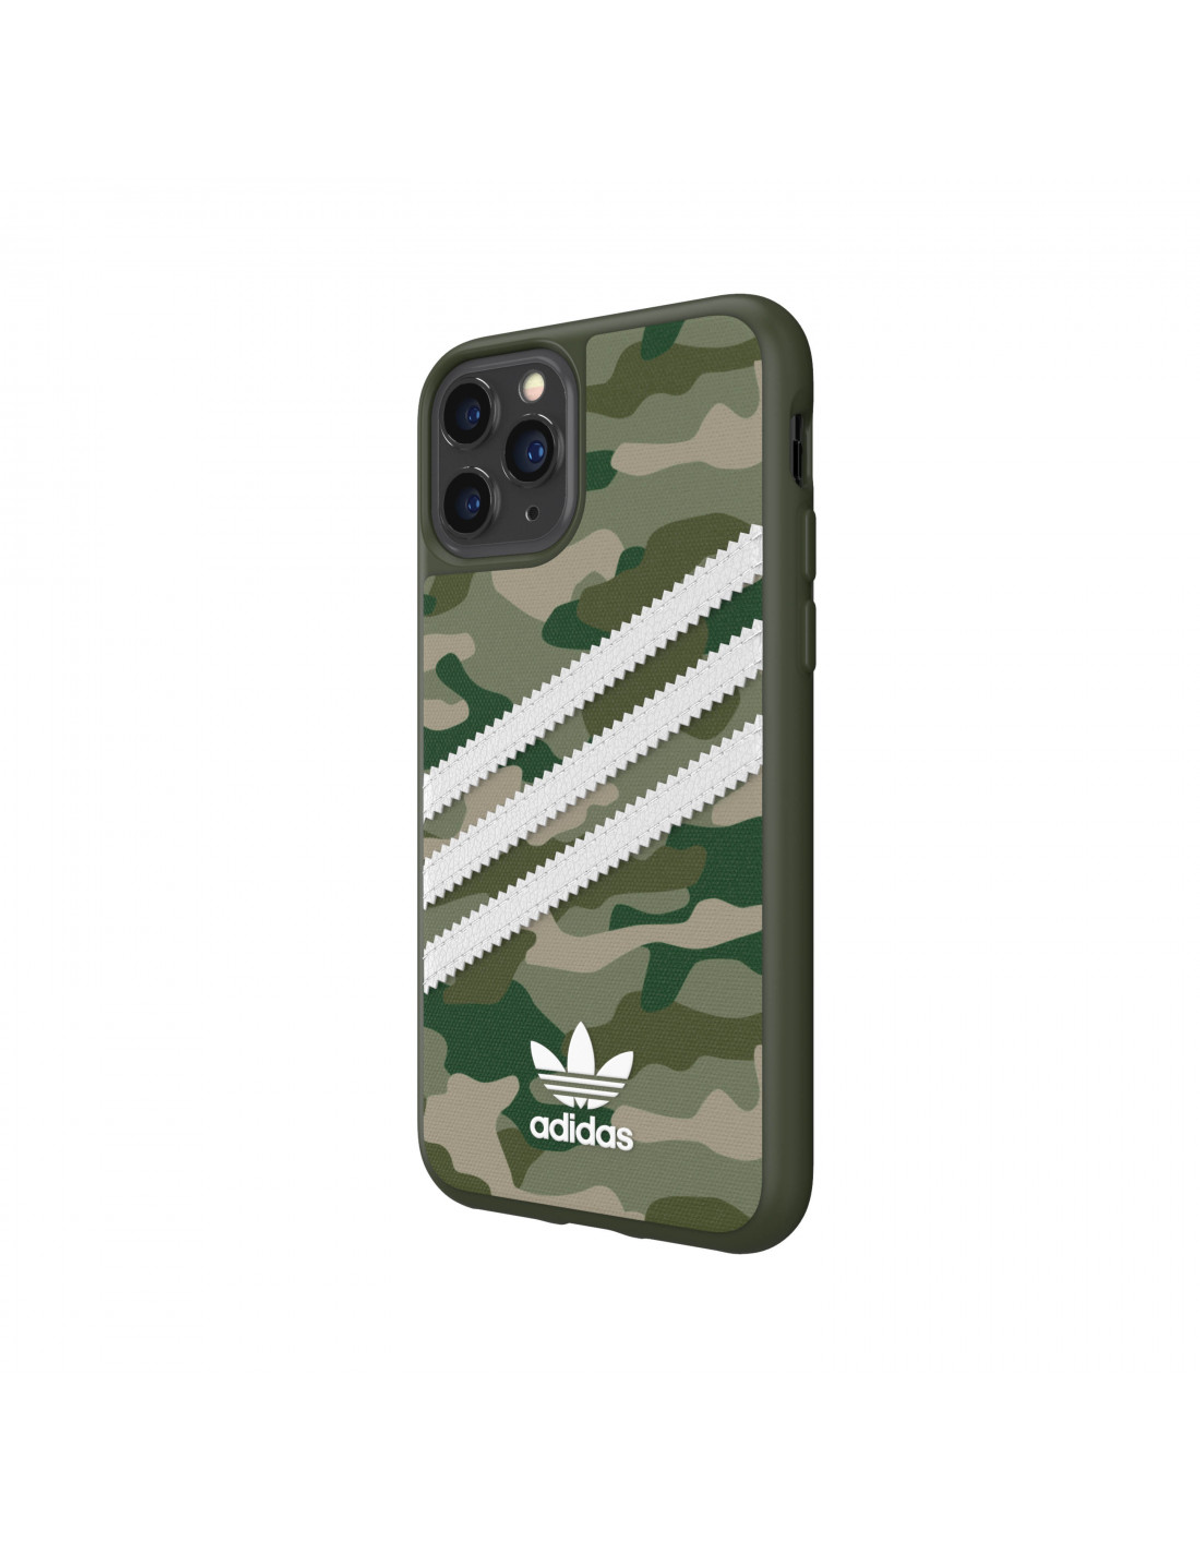 IPHONE ADIDAS WOMAN, Moulded GREEN APPLE, CAMO PRO, Case Backcover, 11